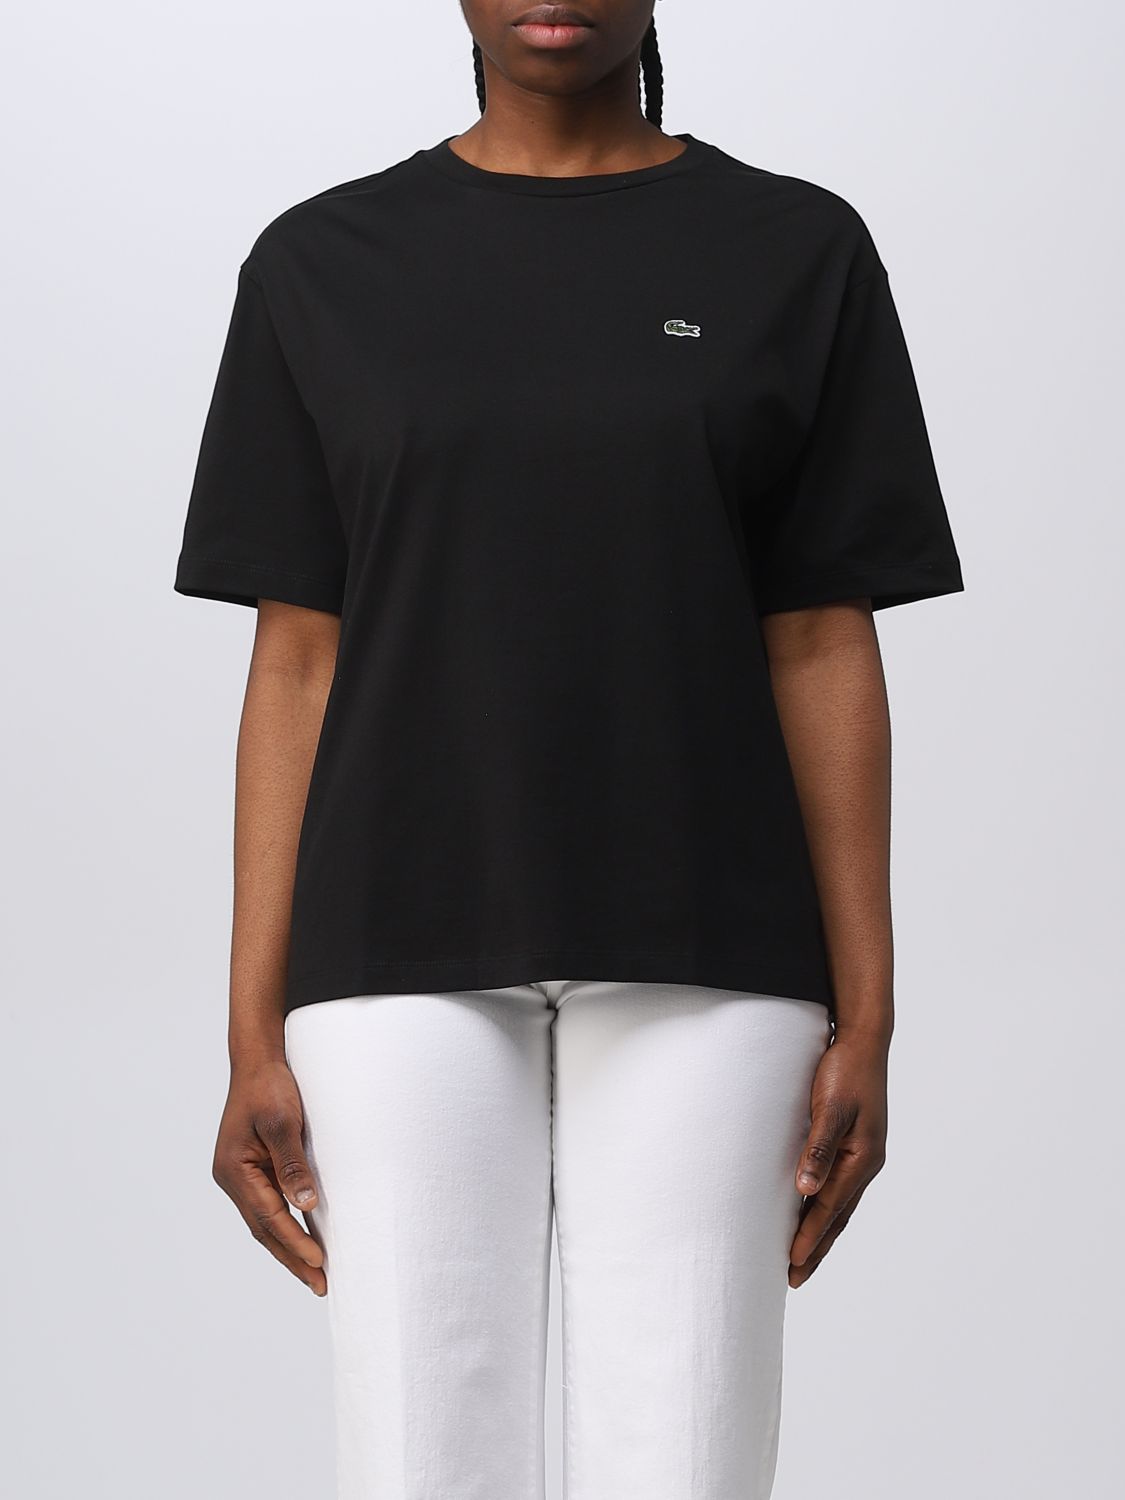 LACOSTE: t-shirt for woman - Black | Lacoste t-shirt TF5441 online on ...